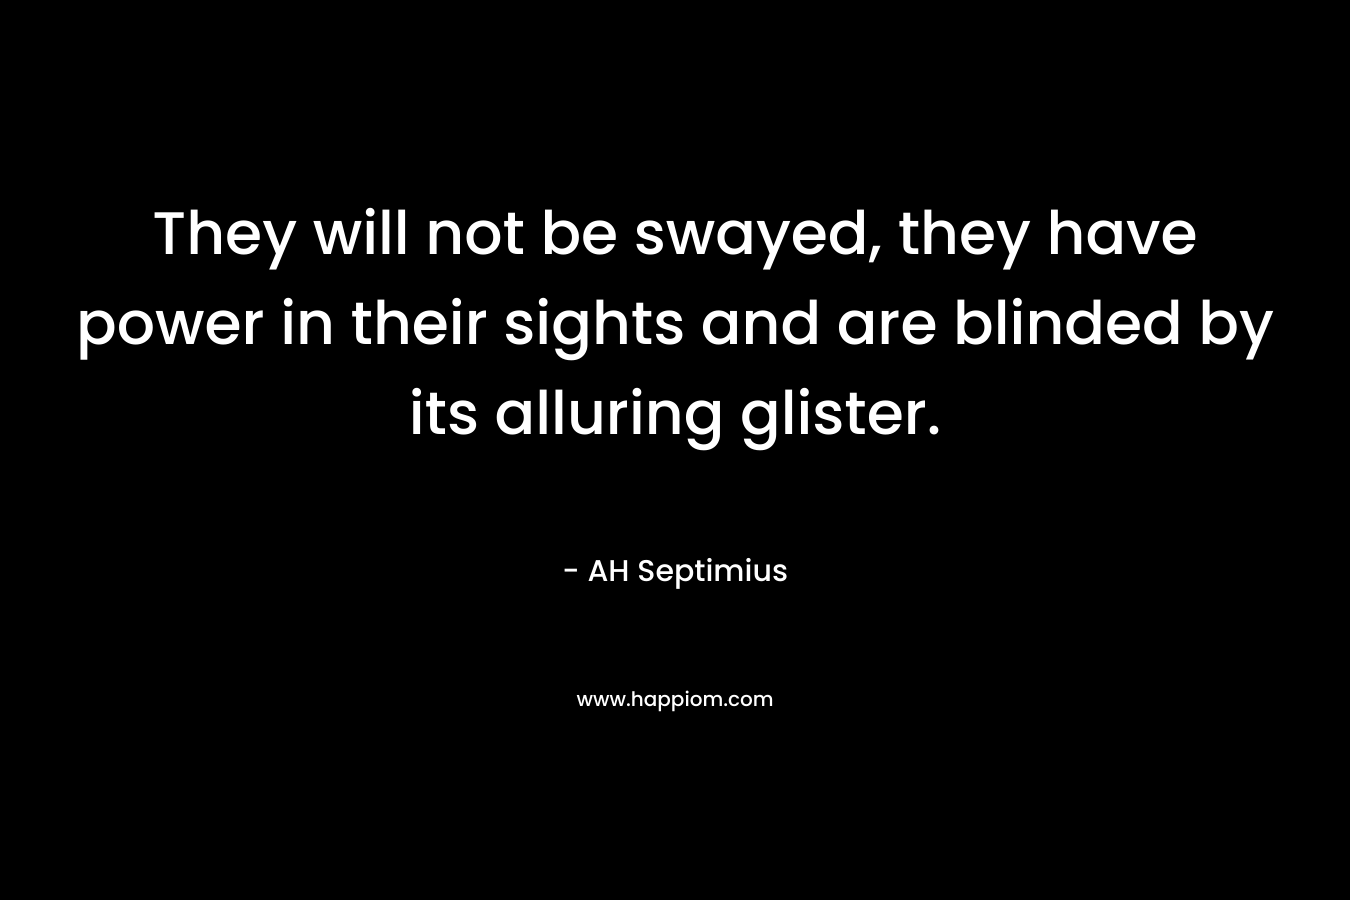 They will not be swayed, they have power in their sights and are blinded by its alluring glister. – AH Septimius